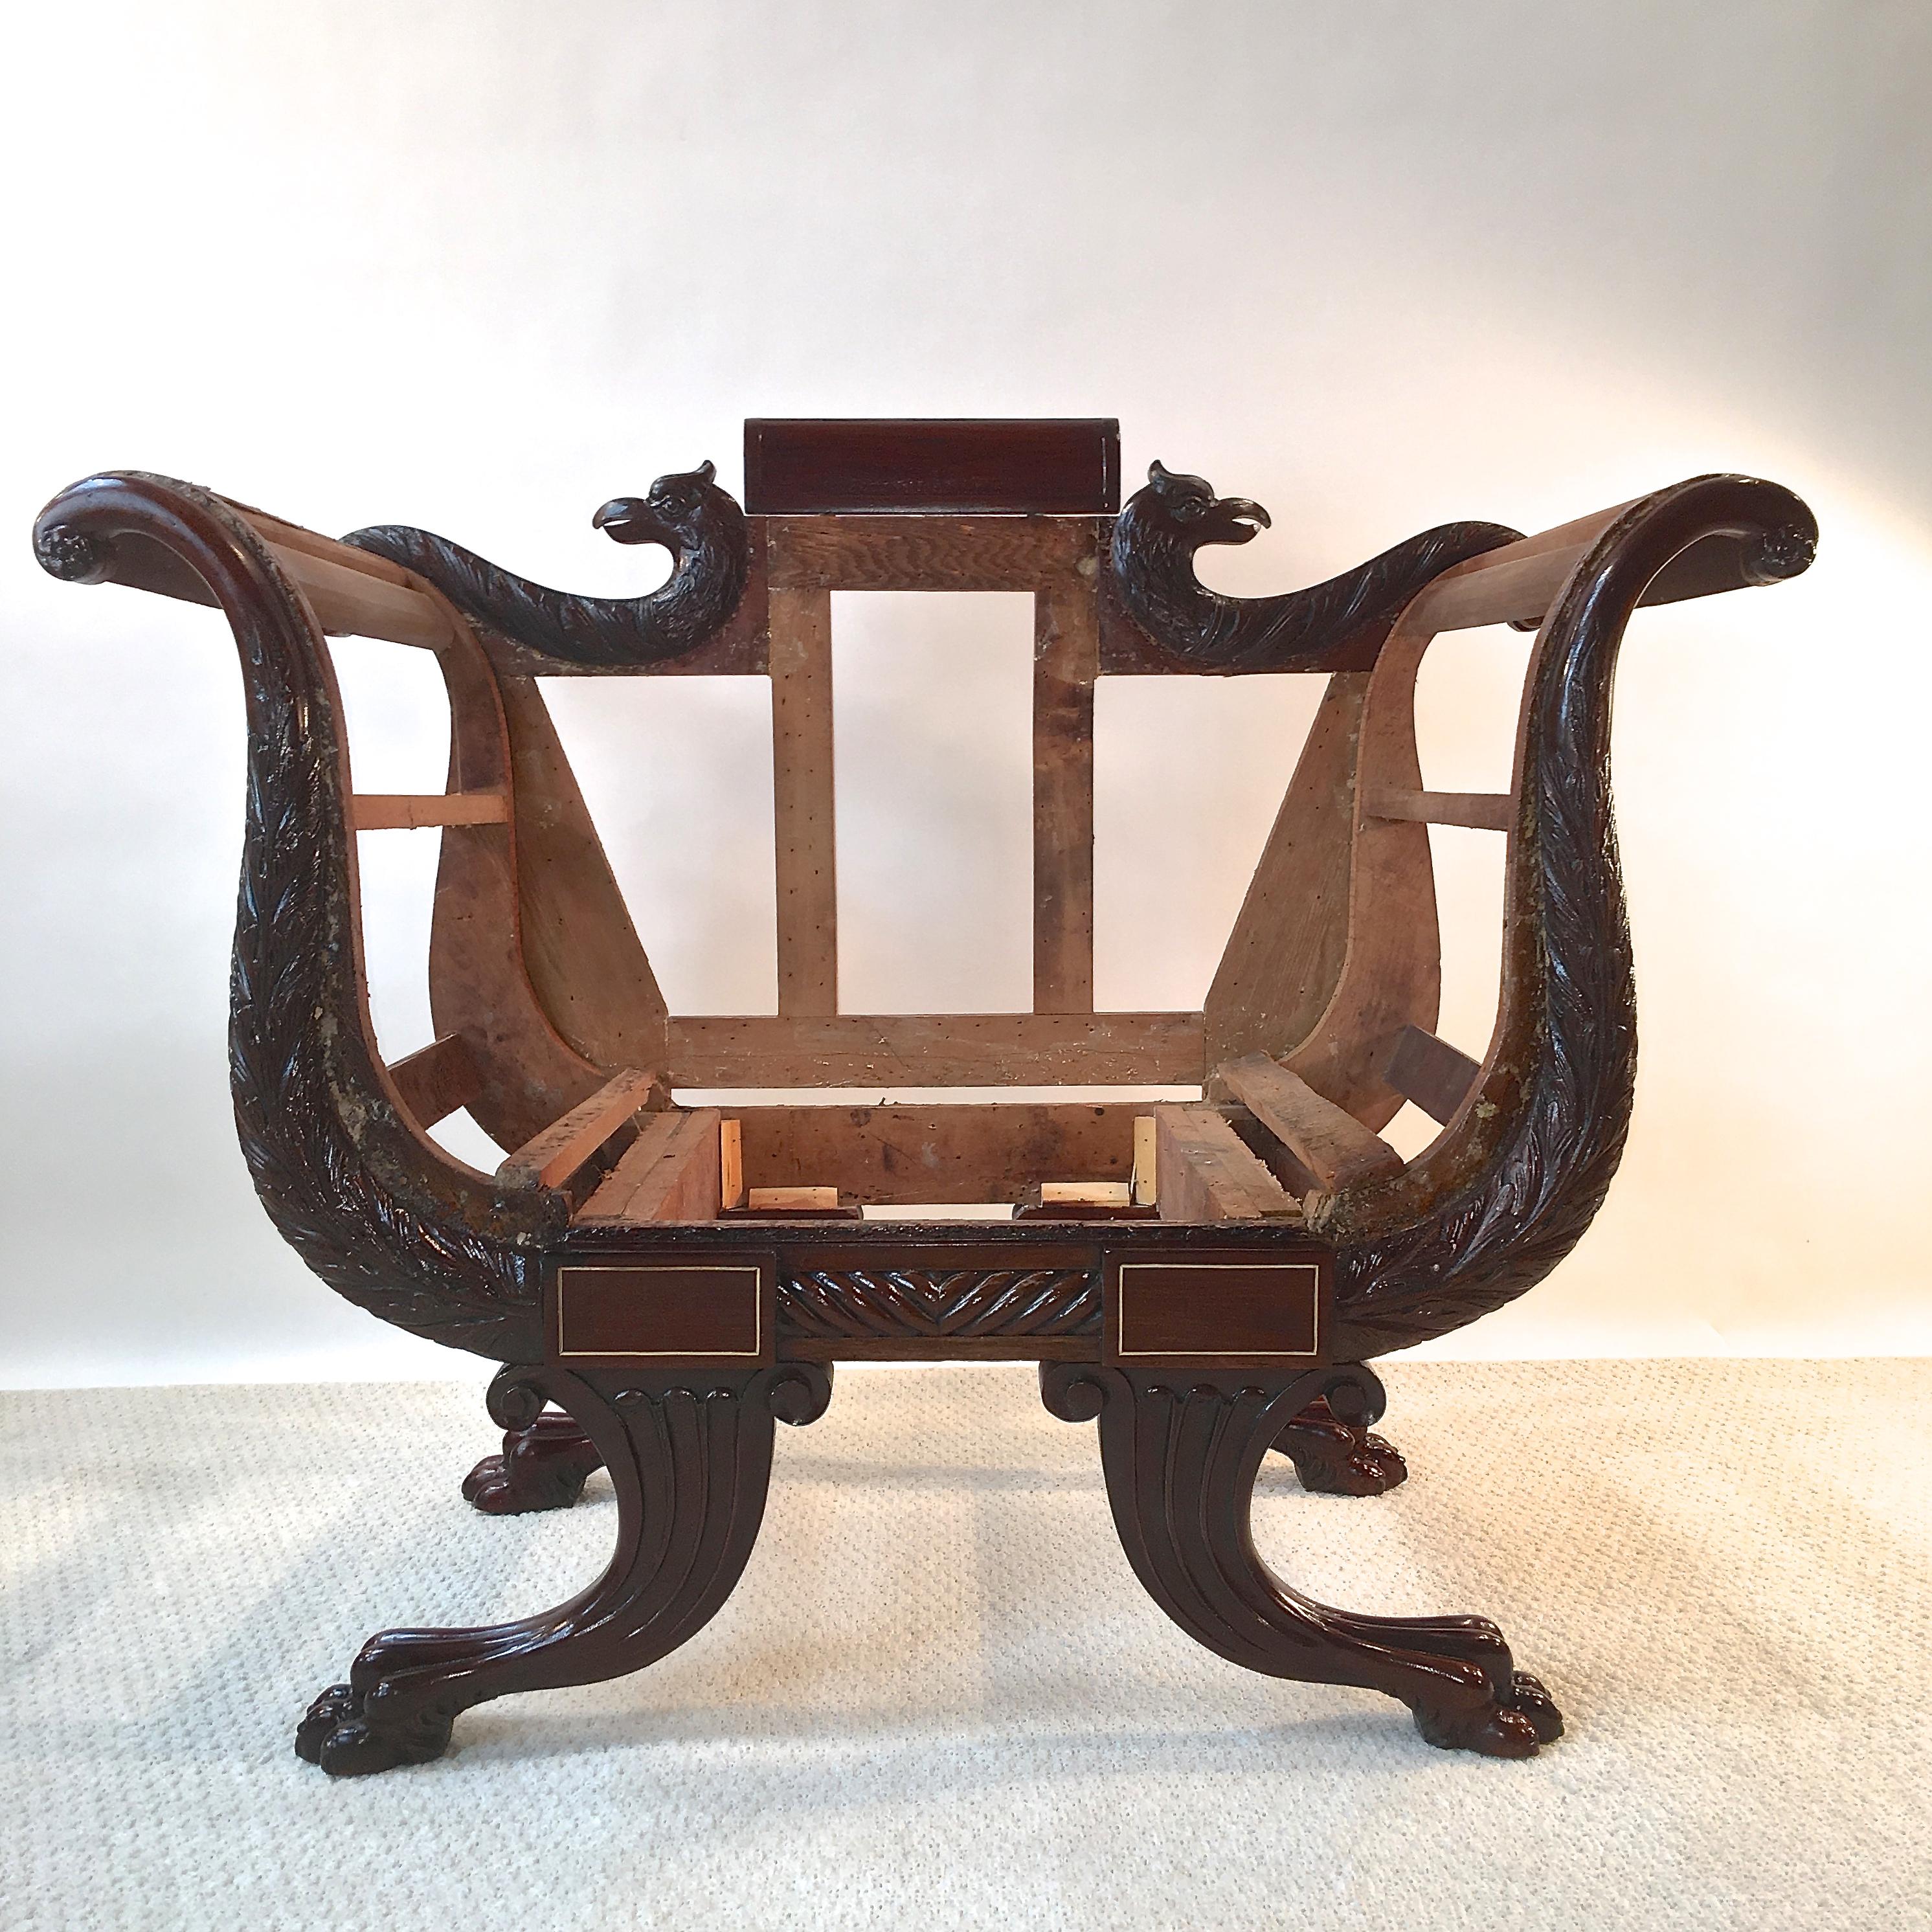 Mid-late 19th century (Second Period) American Empire chair, stripped, tightened and finish restored and polished, ready for your upholsterer's workbench.
It is most unusual to find seating of this period and style in this size. Sofas and settees